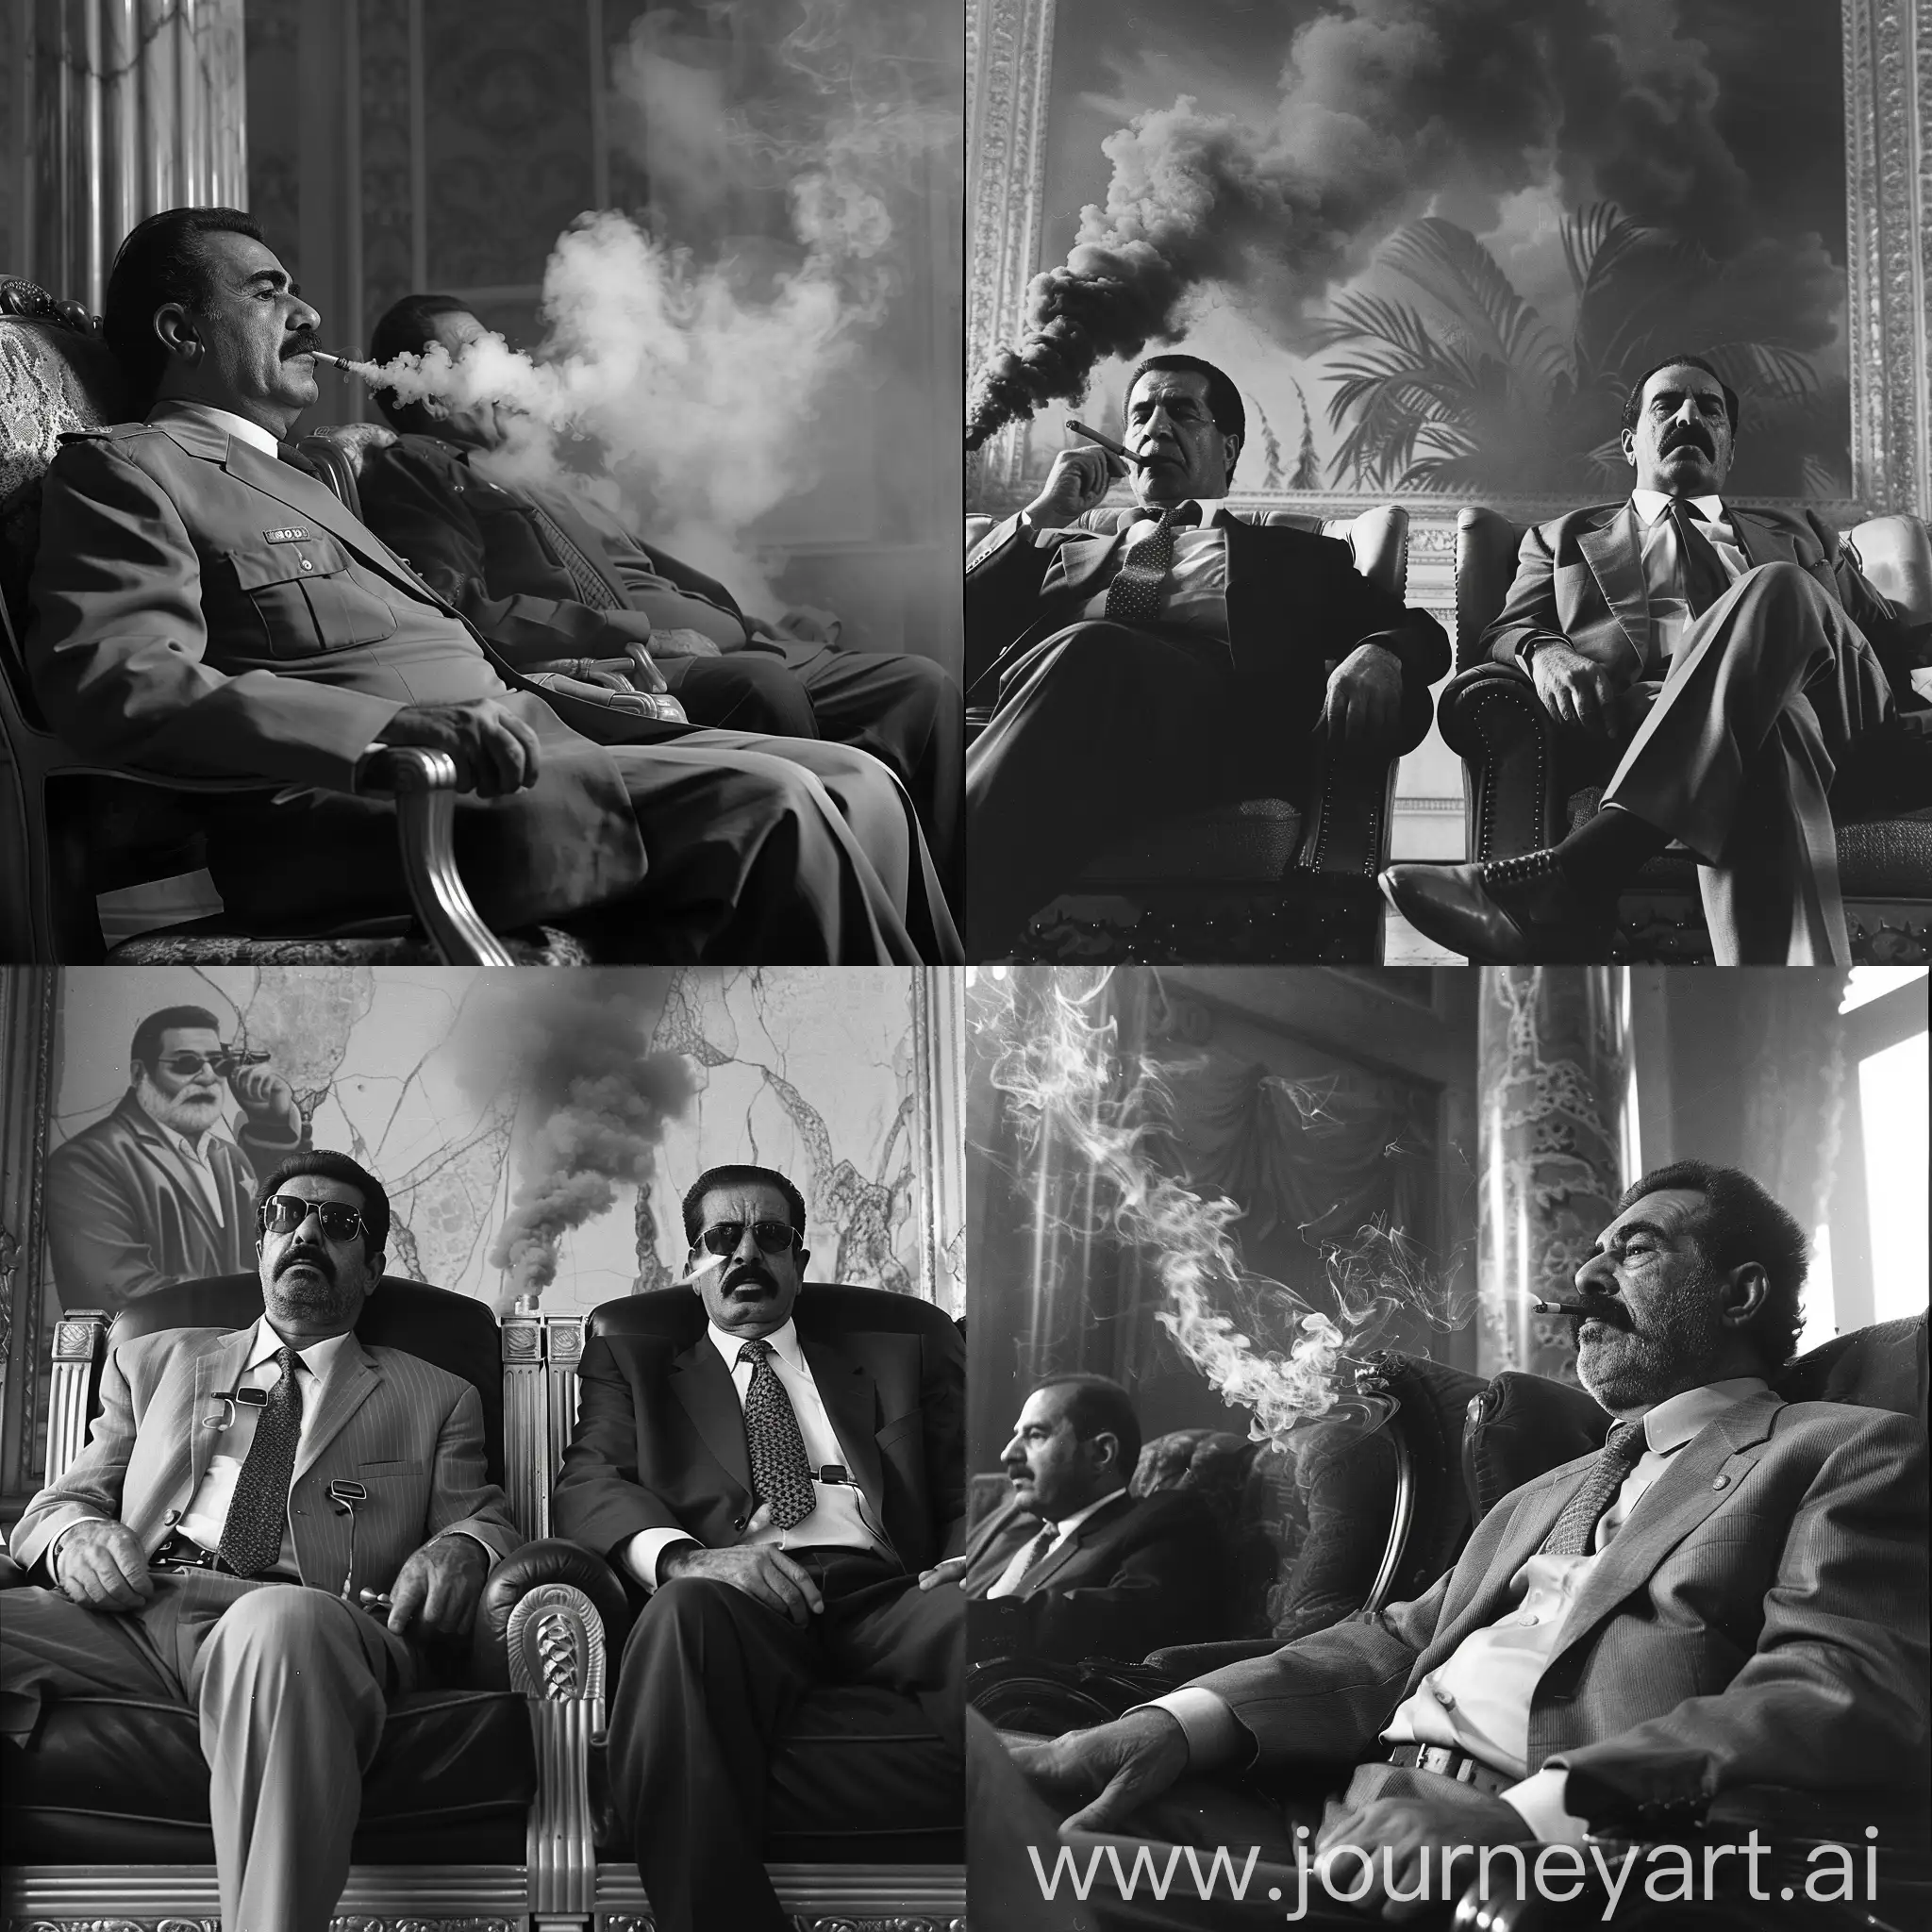 Saddam-Hussein-and-Companion-Smoking-in-Presidential-Setting-Vintage-Black-and-White-Photograph